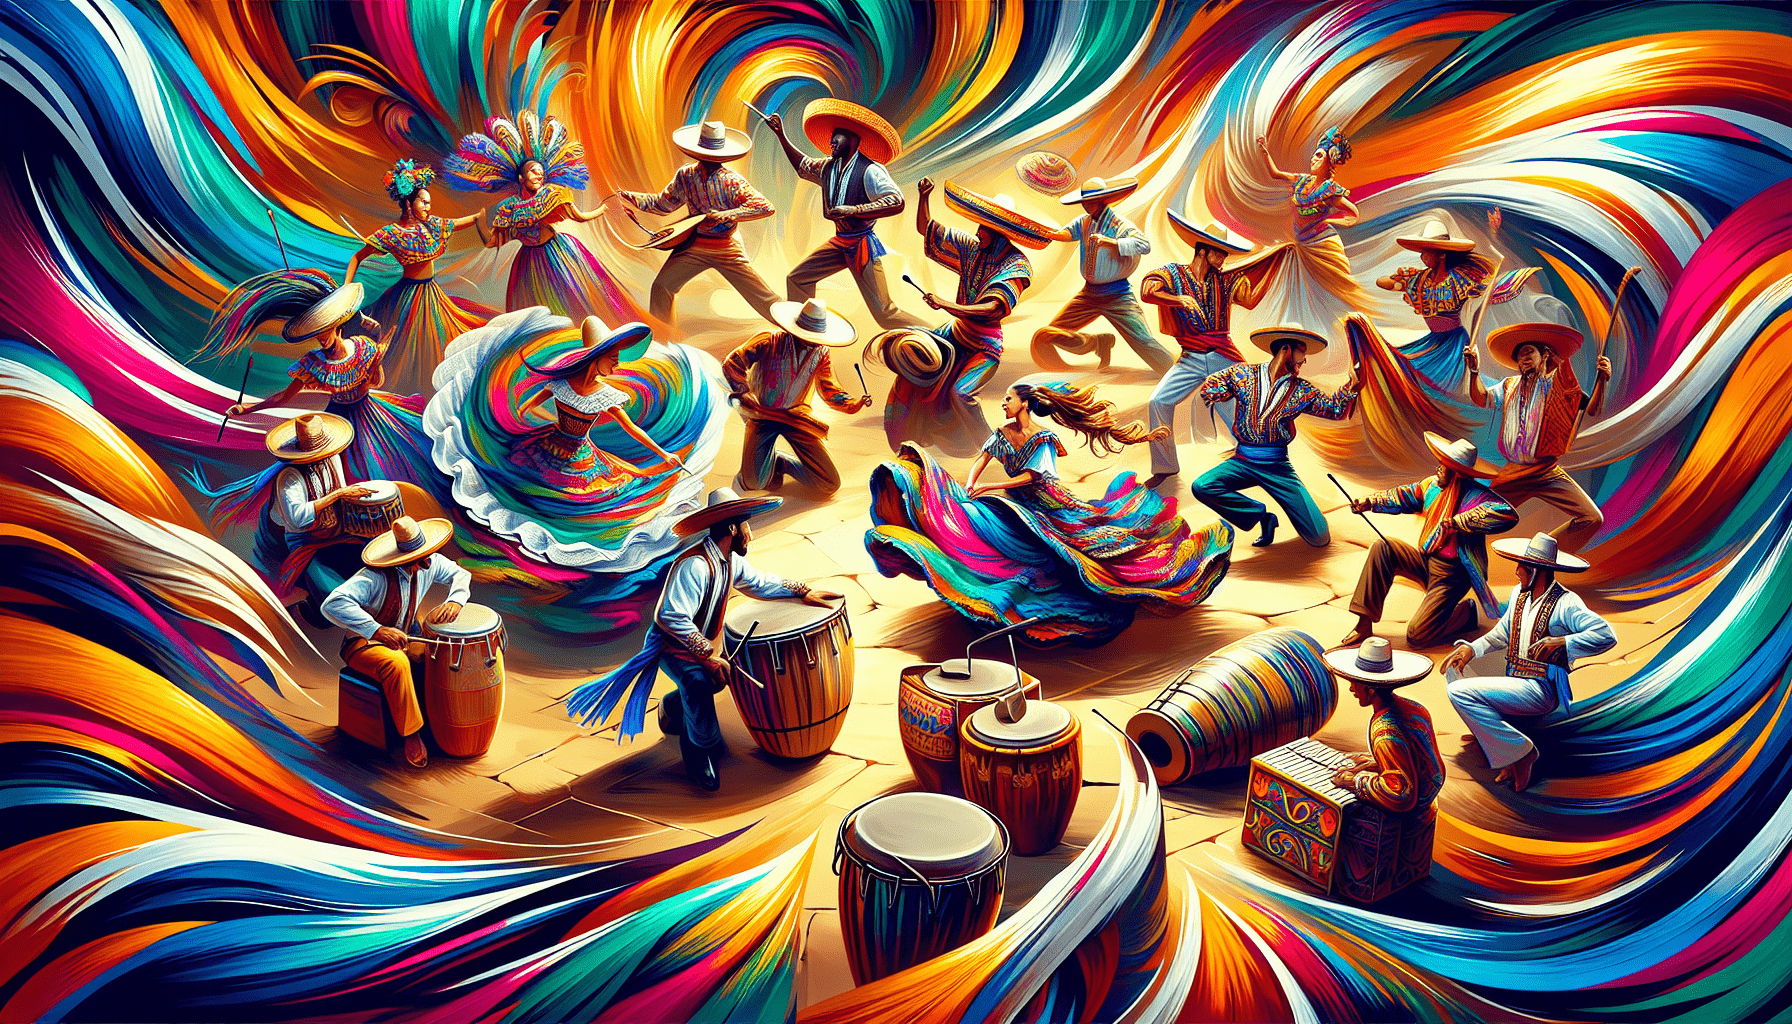 How Can I Experience Nicaragua’s Traditional Dance And Music Performances?